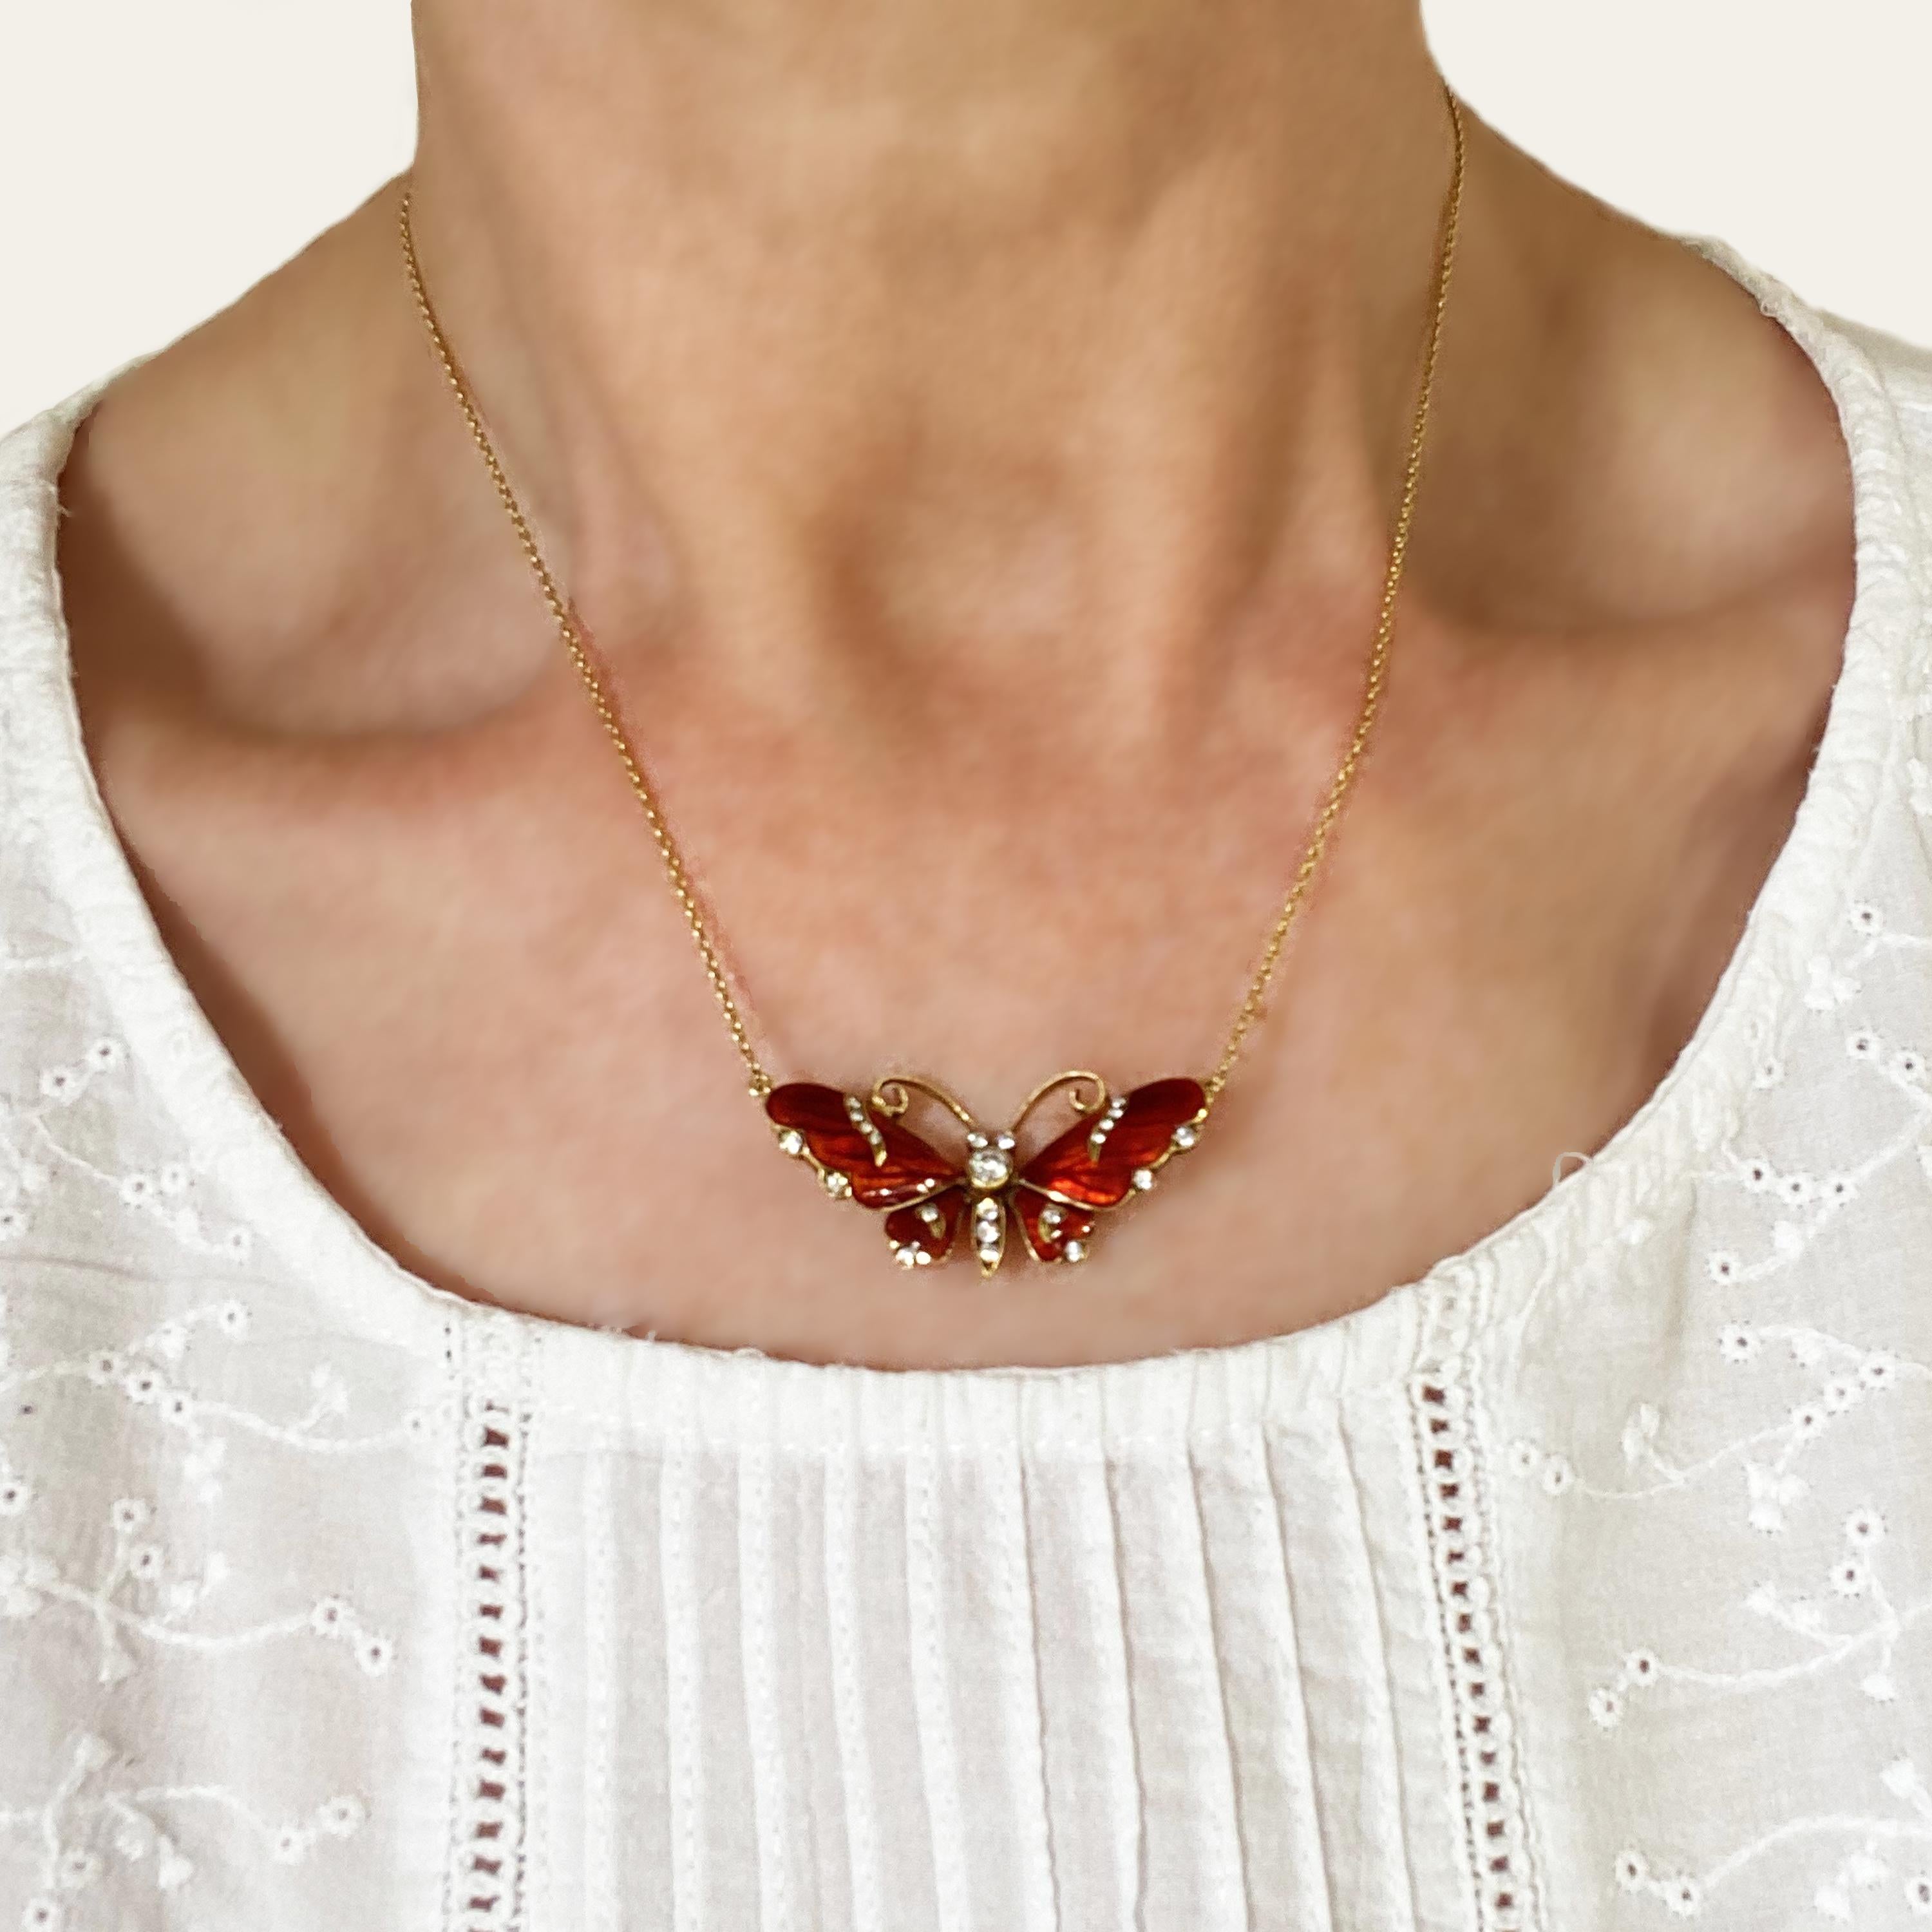 A red enamel butterfly pendant, with guilloche enamel depicting the veins in the wings, with 0.28ct of round brilliant-cut diamonds, in the wings, eyes, thorax and abdomen, mounted in gold, on a gold trace chain.